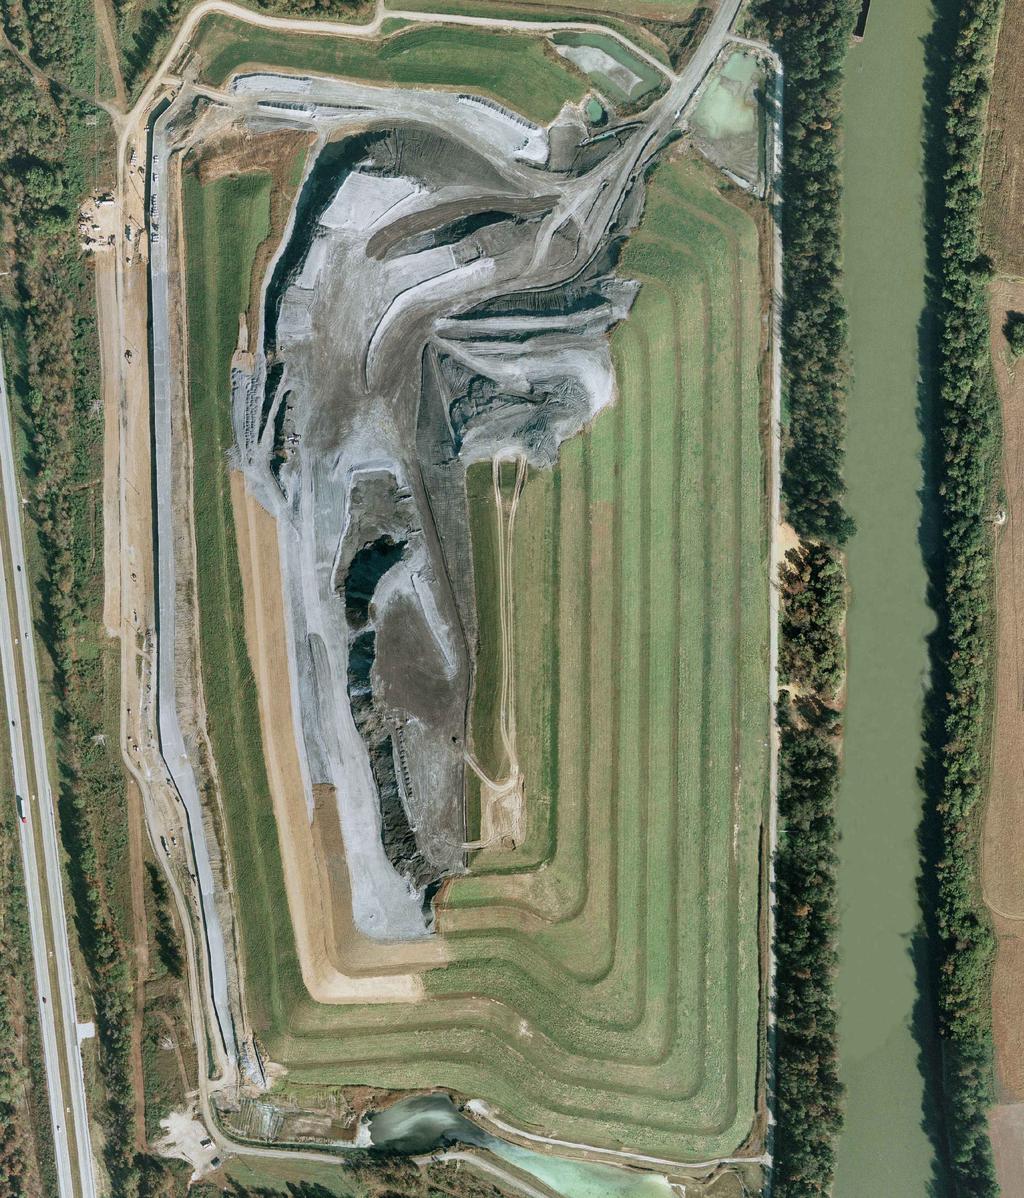 Flight Date: October 23, 2016 BIG RIVERS ELECTRIC CORPORATION Green CCR Landfill 2016 Annual Inspection Aerial Photo Project Number: 12/122016 Scale: NOT TO SCALE Drawn